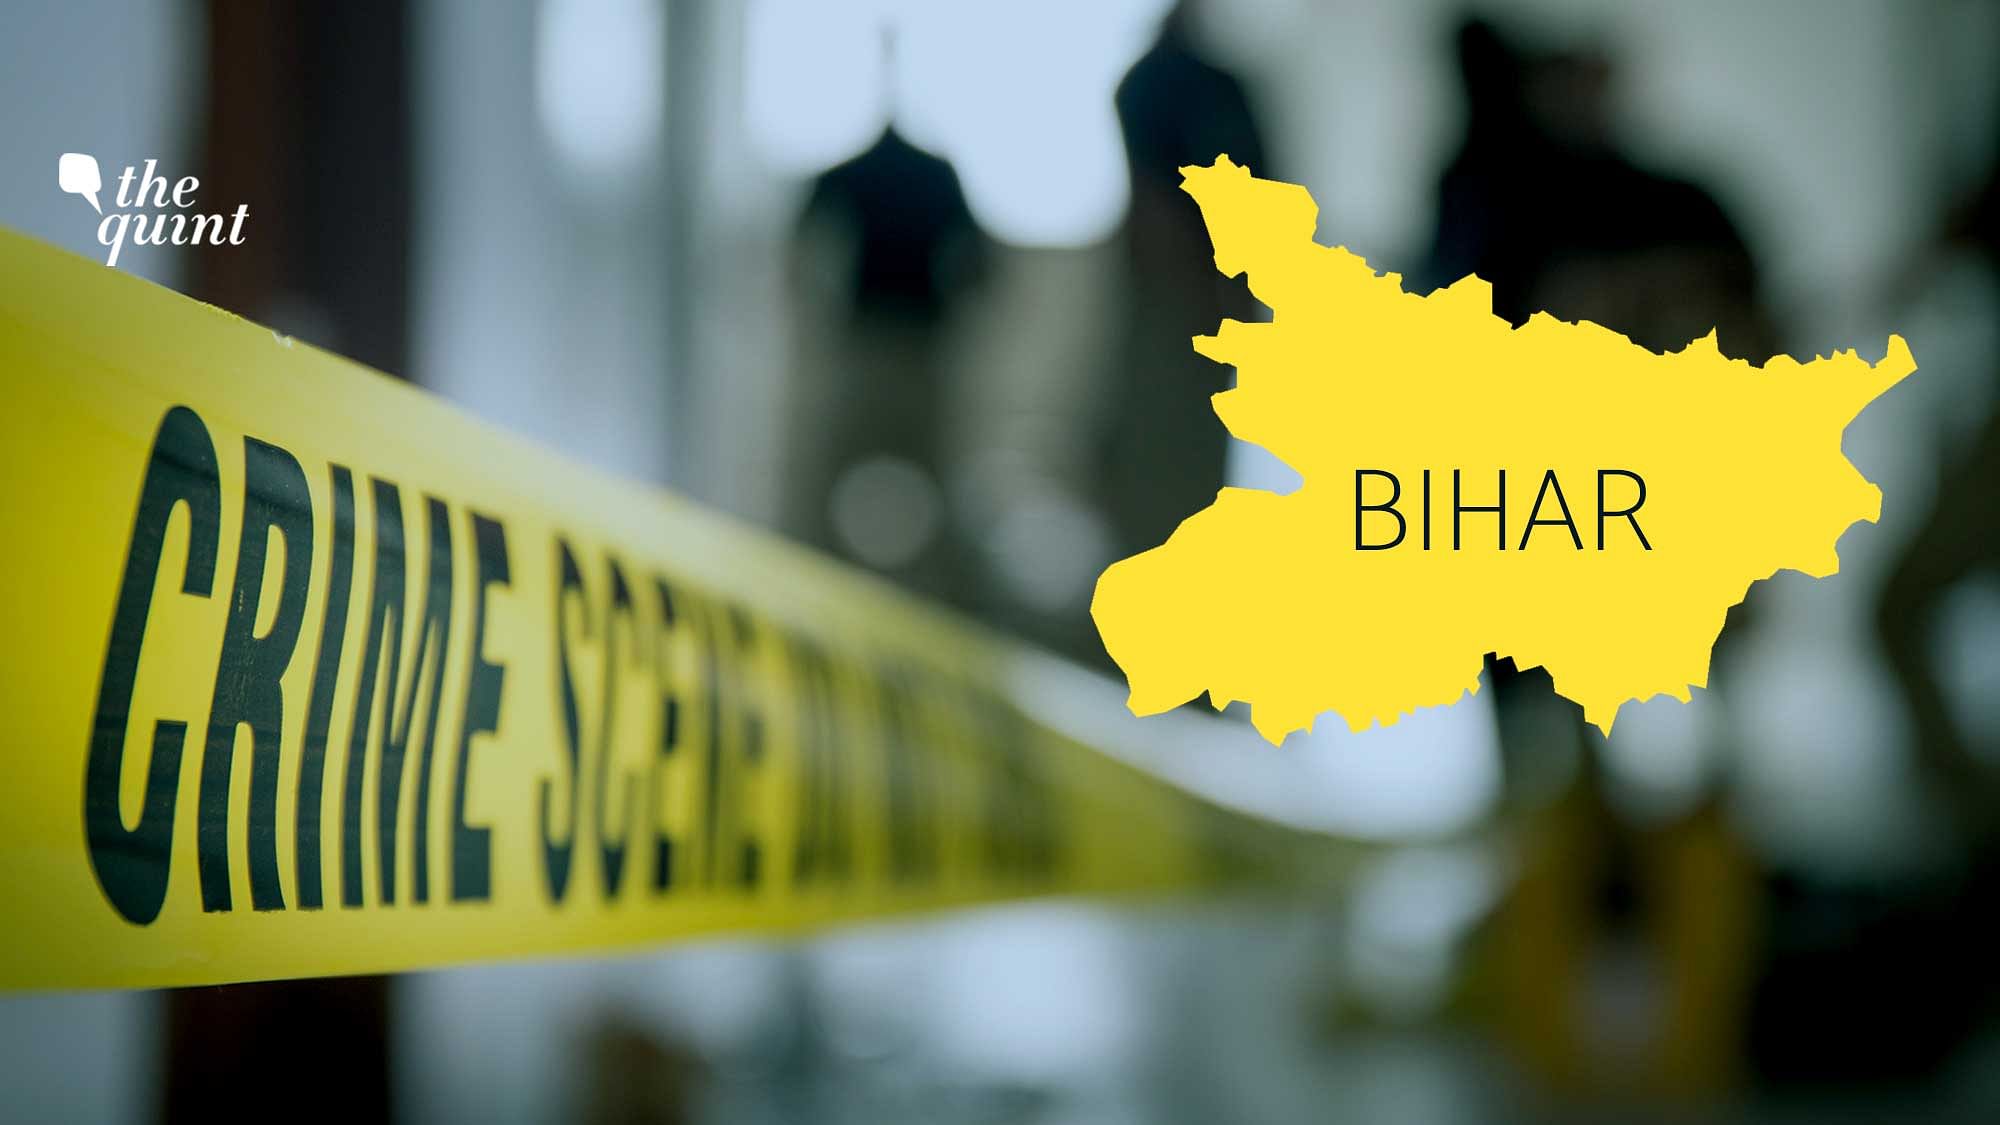 Despite BJP-JD(U)’s claims of increased law and order in the state, data shows crime rates have not declined in Bihar.